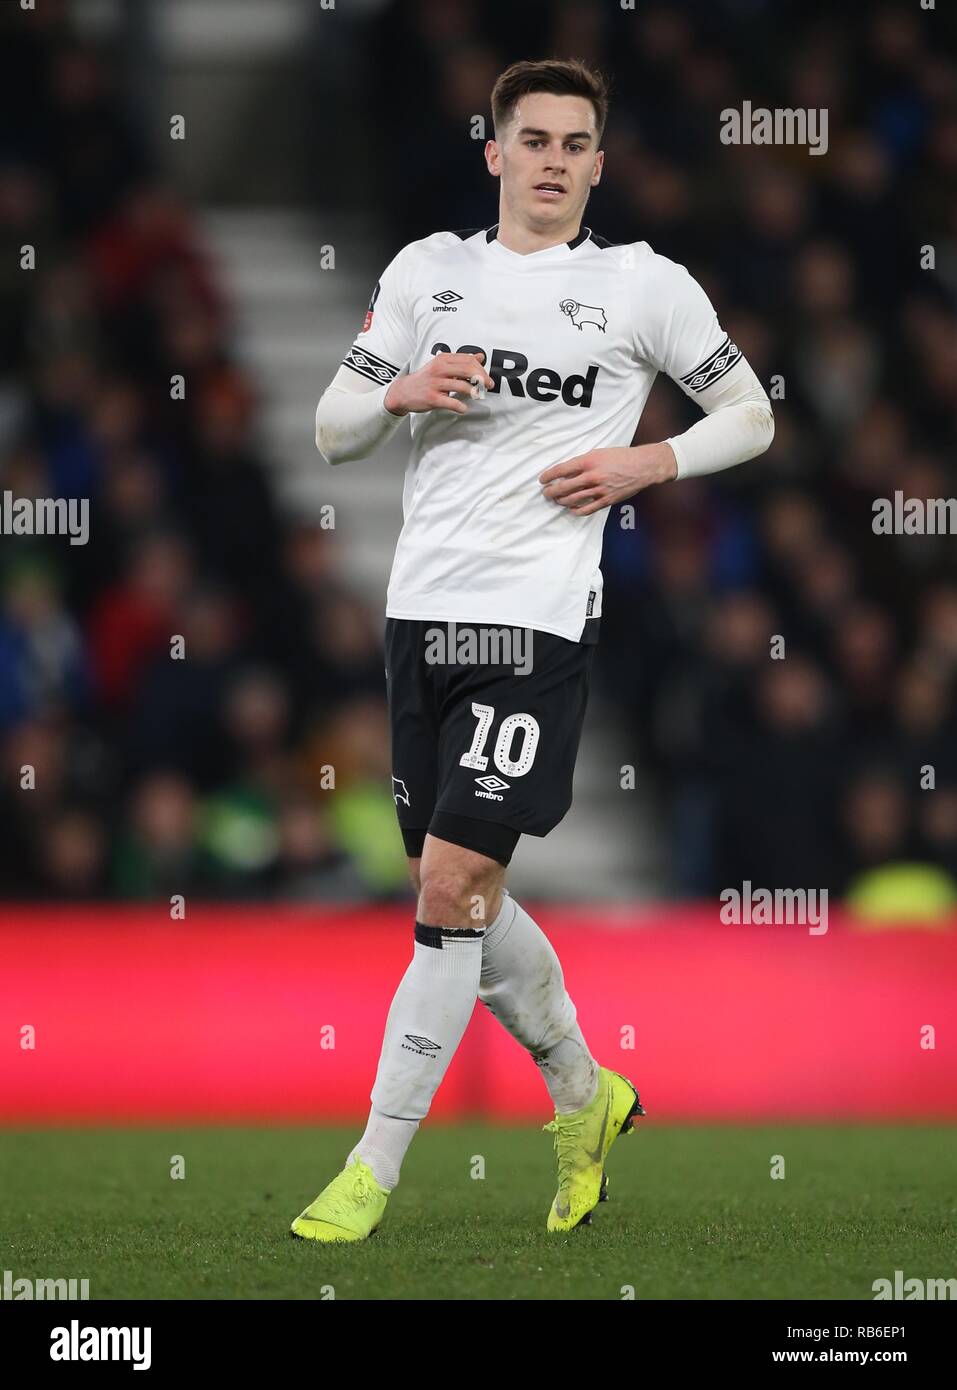 TOM LAWRENCE, Derby County FC, DERBY COUNTY V SOUTHAMPTON, die Emirate FA Cup 3. Runde, 2019 Stockfoto